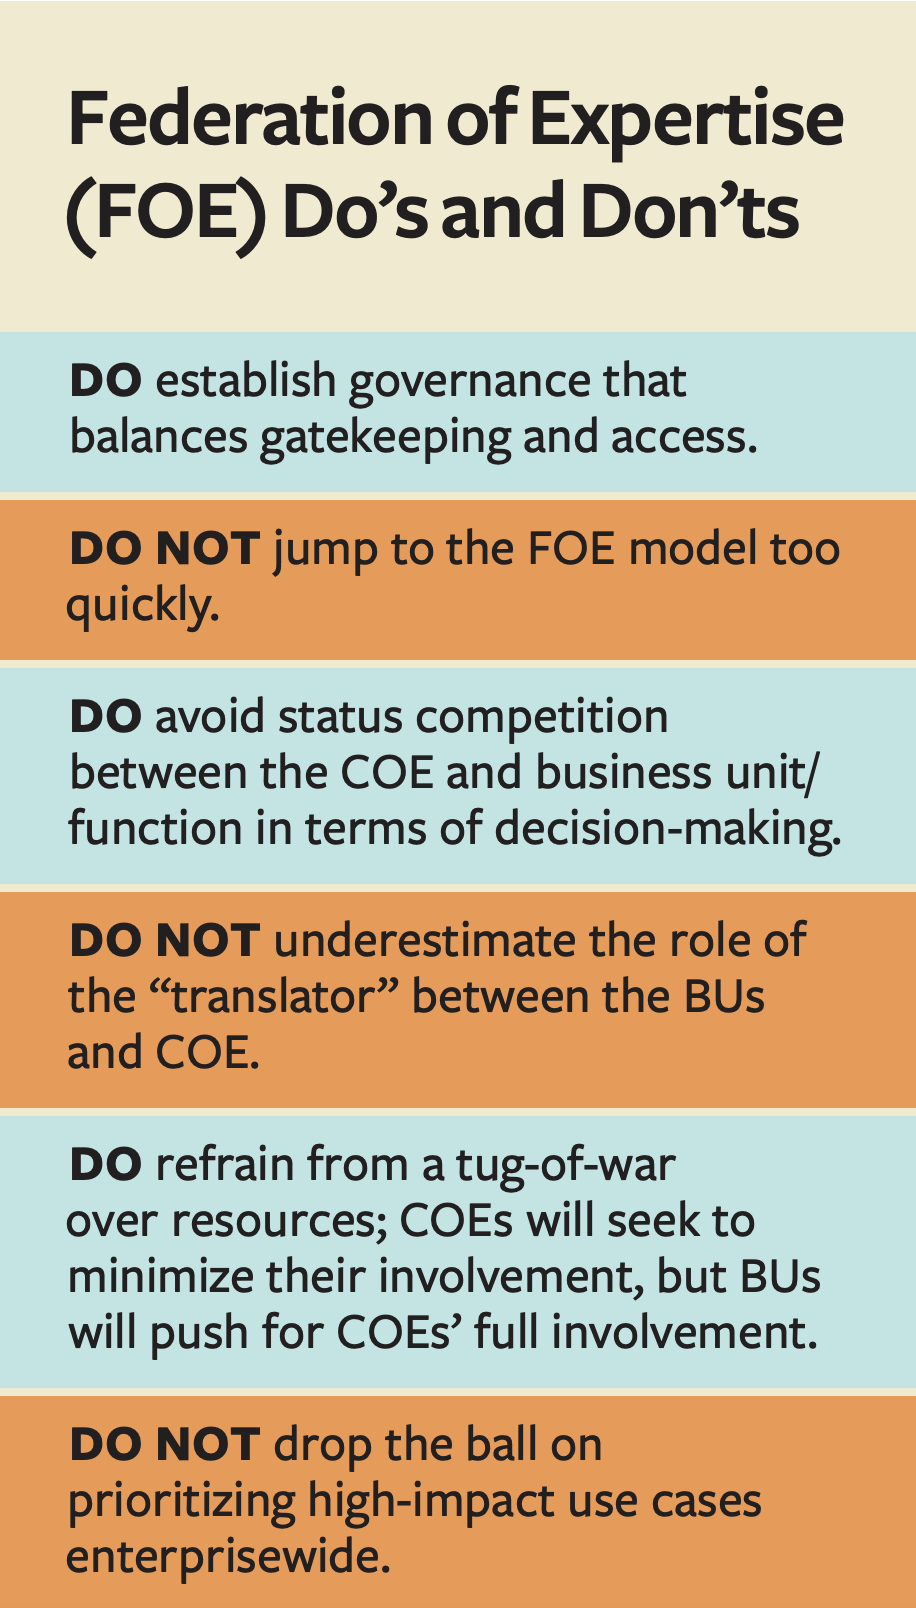 Federation of Expertise (FOE) Do’s and Don’ts